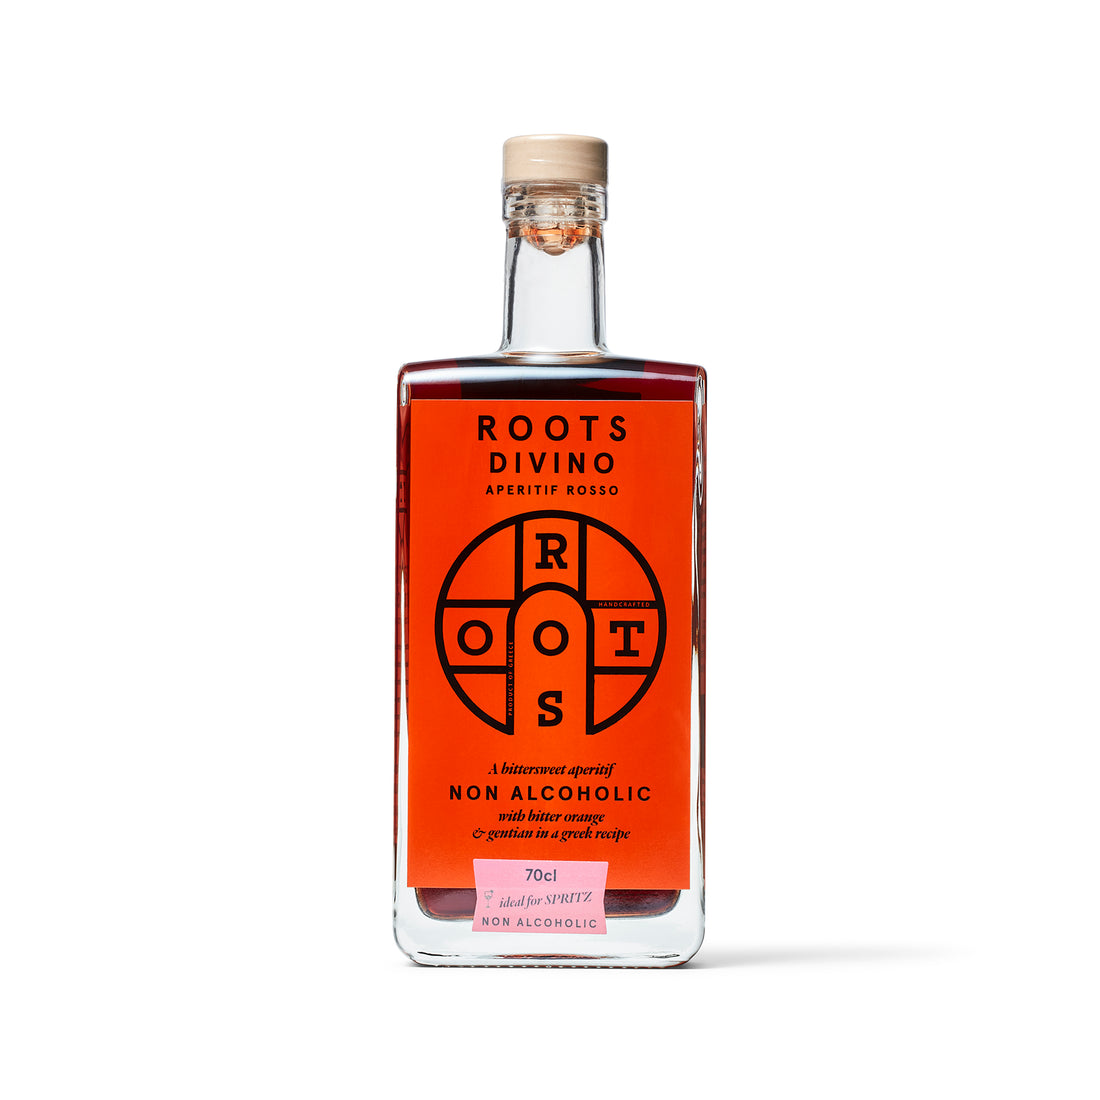 Roots Divino Aperitif Rosso Non-Alcoholic Sweet Vermouth